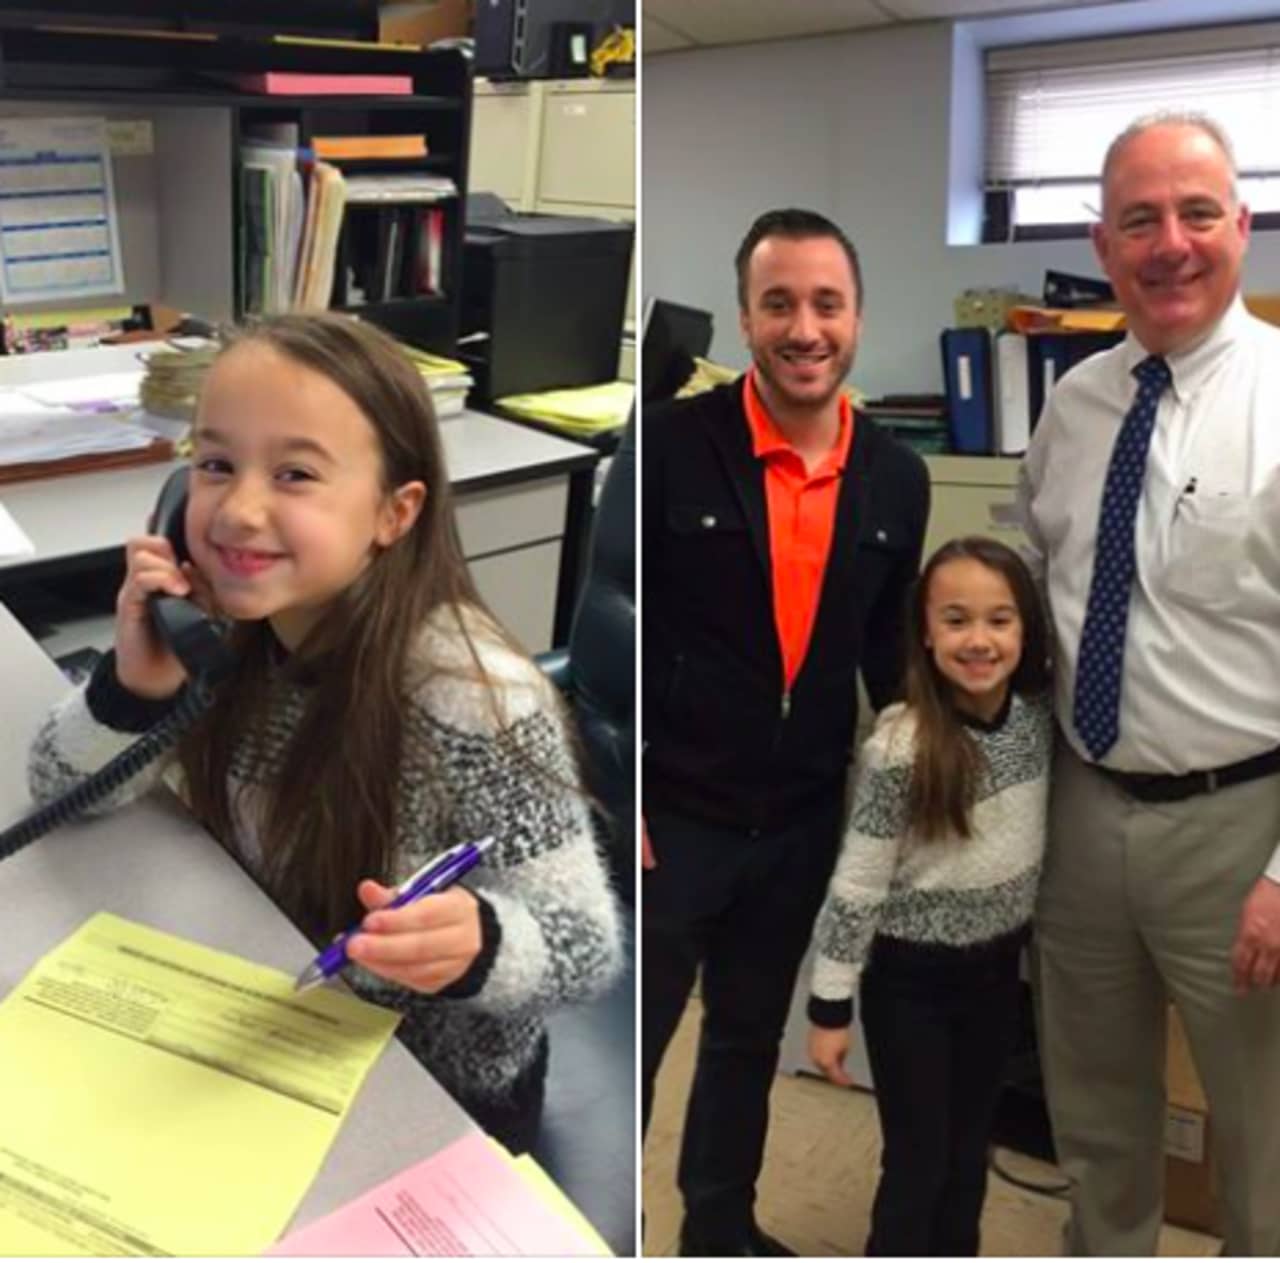 Tim and Mia Conte with Mayor Robert White on "Take Your Daughter to Work Day"